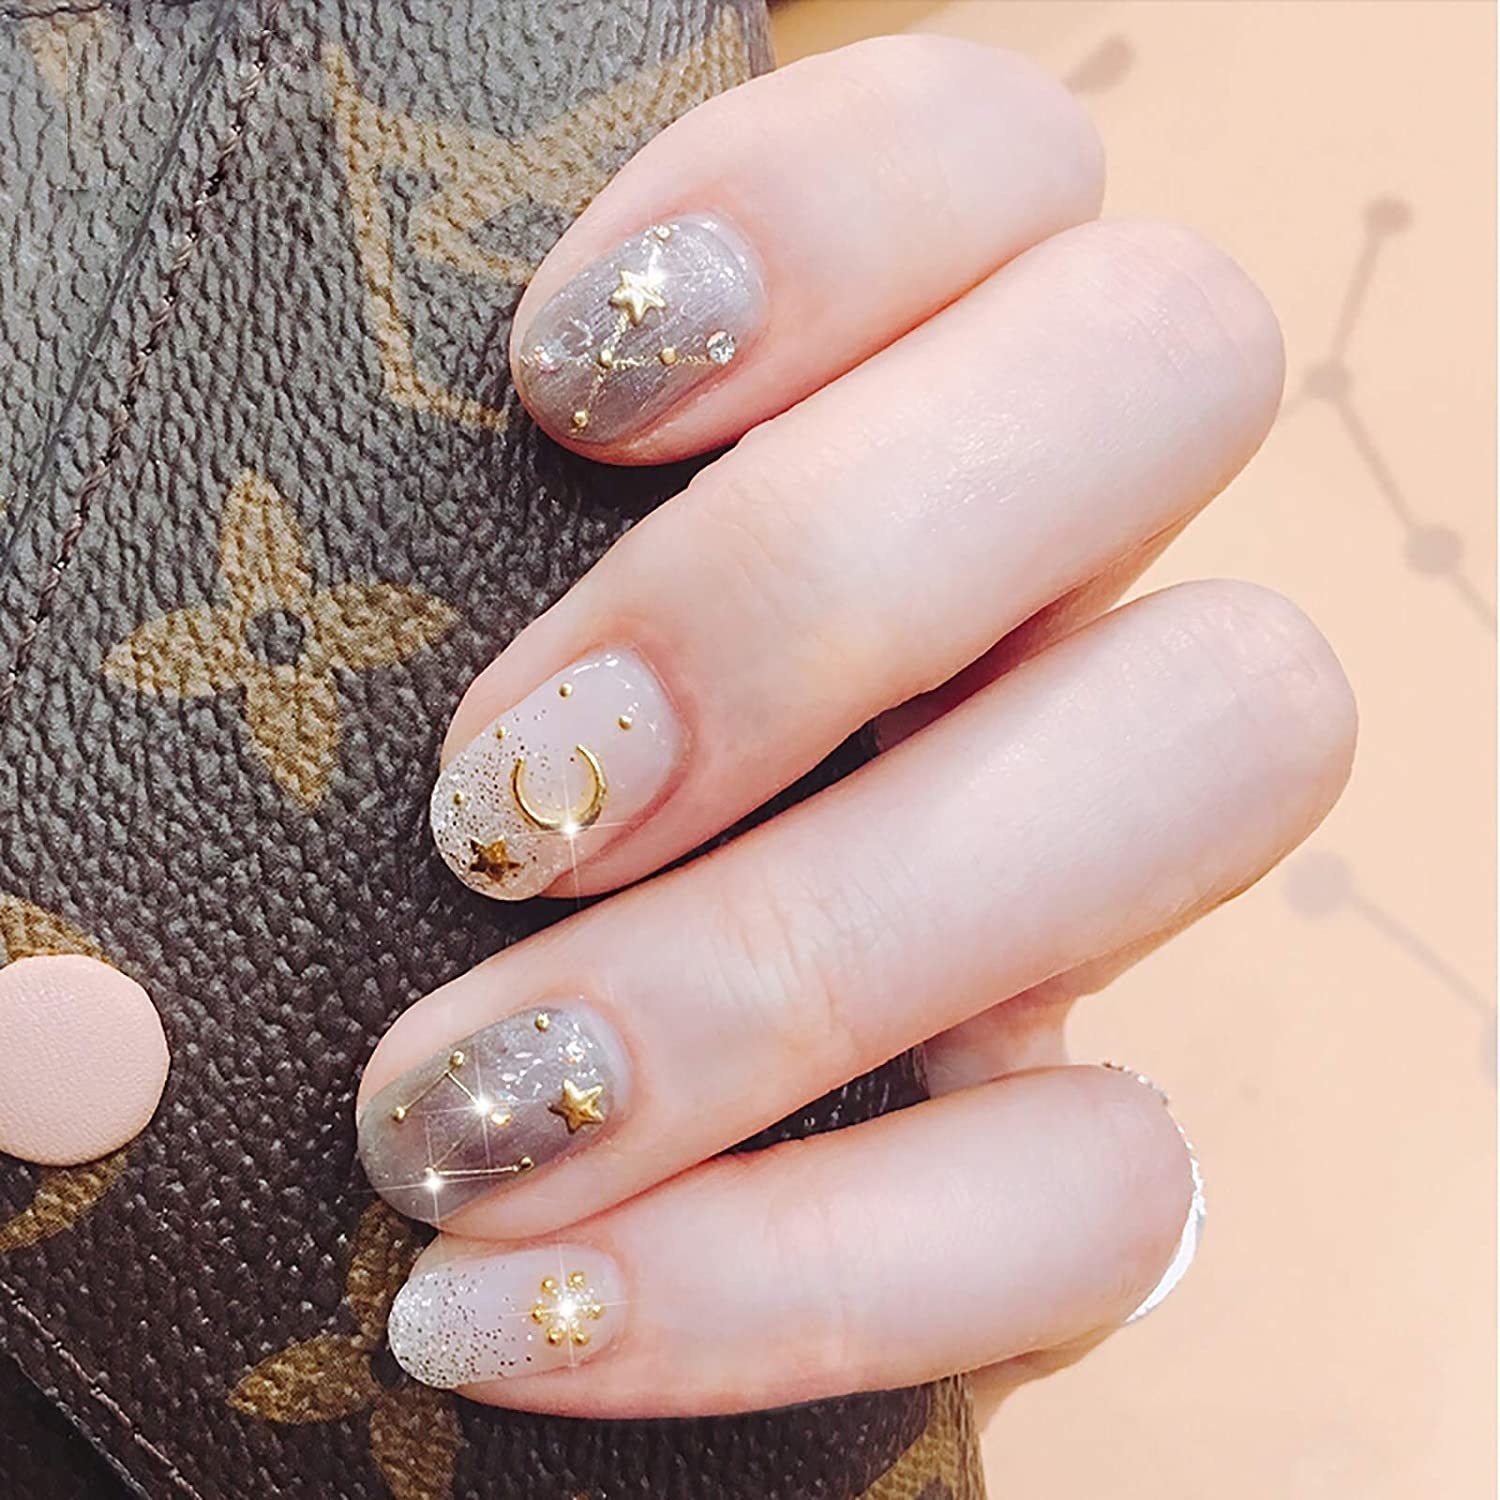 a close up of a person&#x27;s manicured nails with the metallic stickers on top